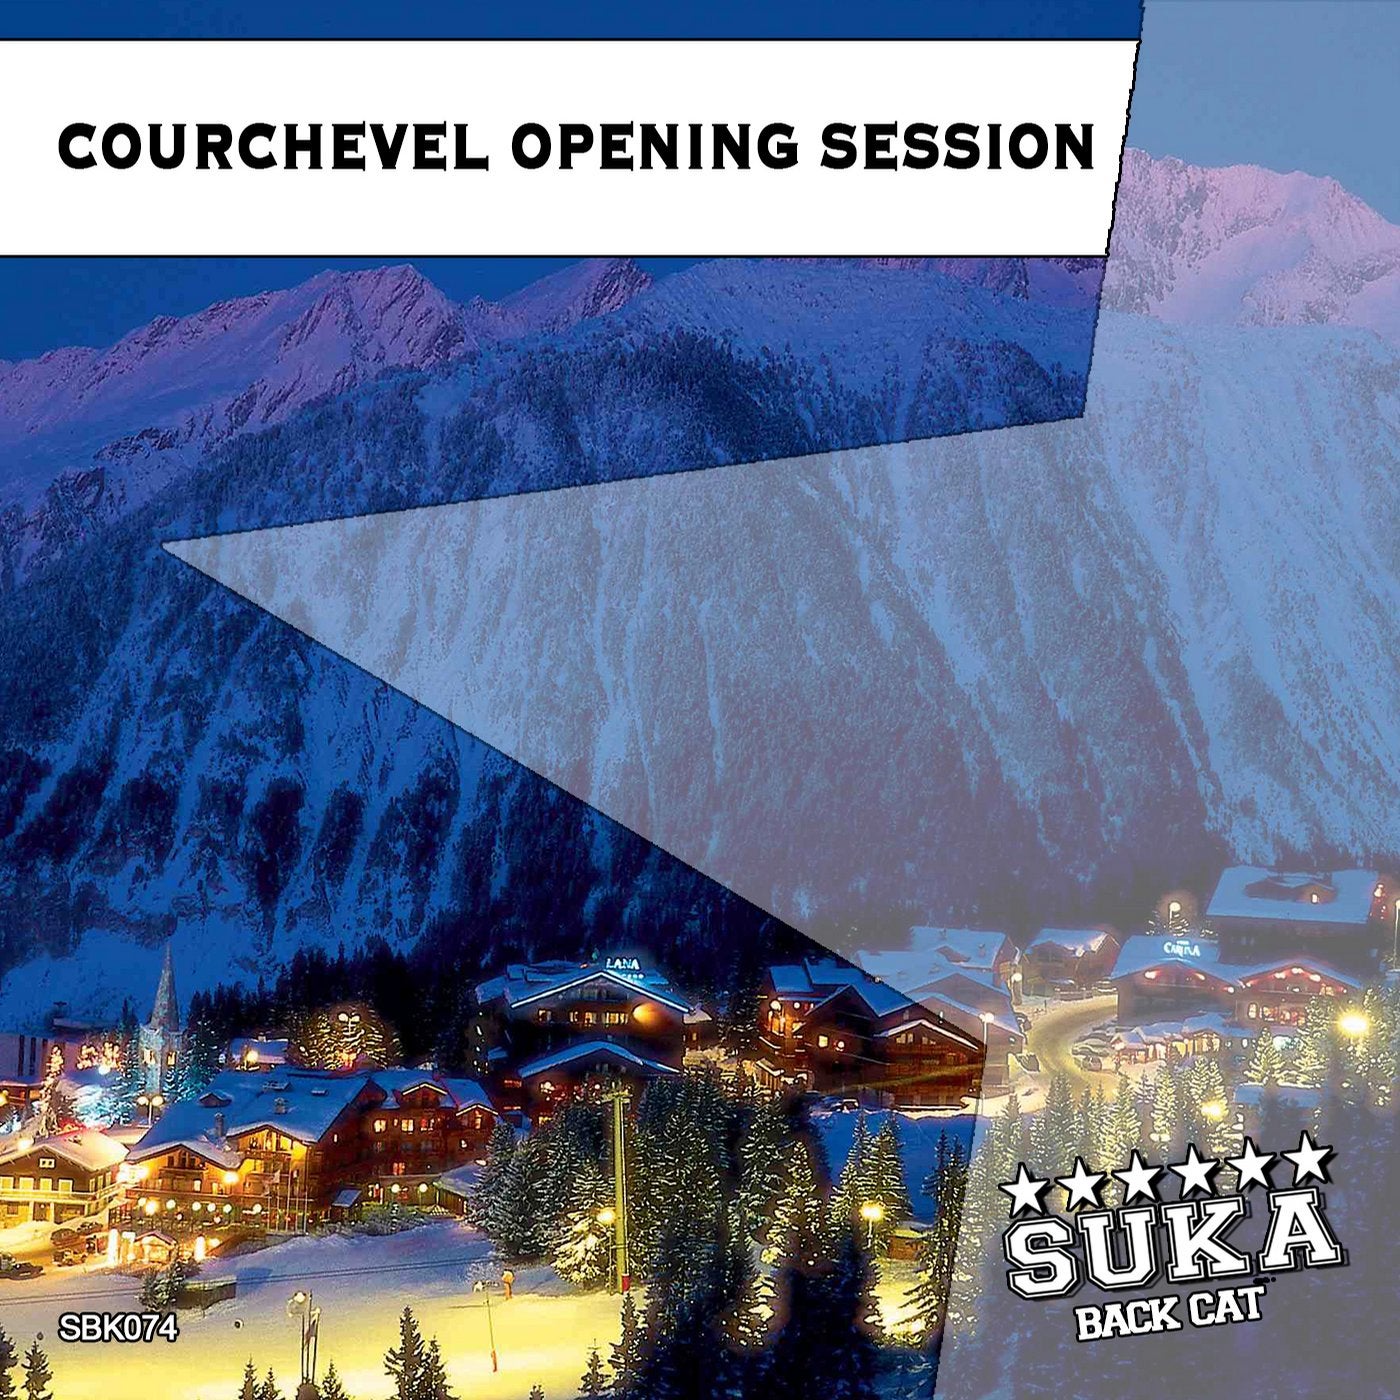 Courchevel Opening Session